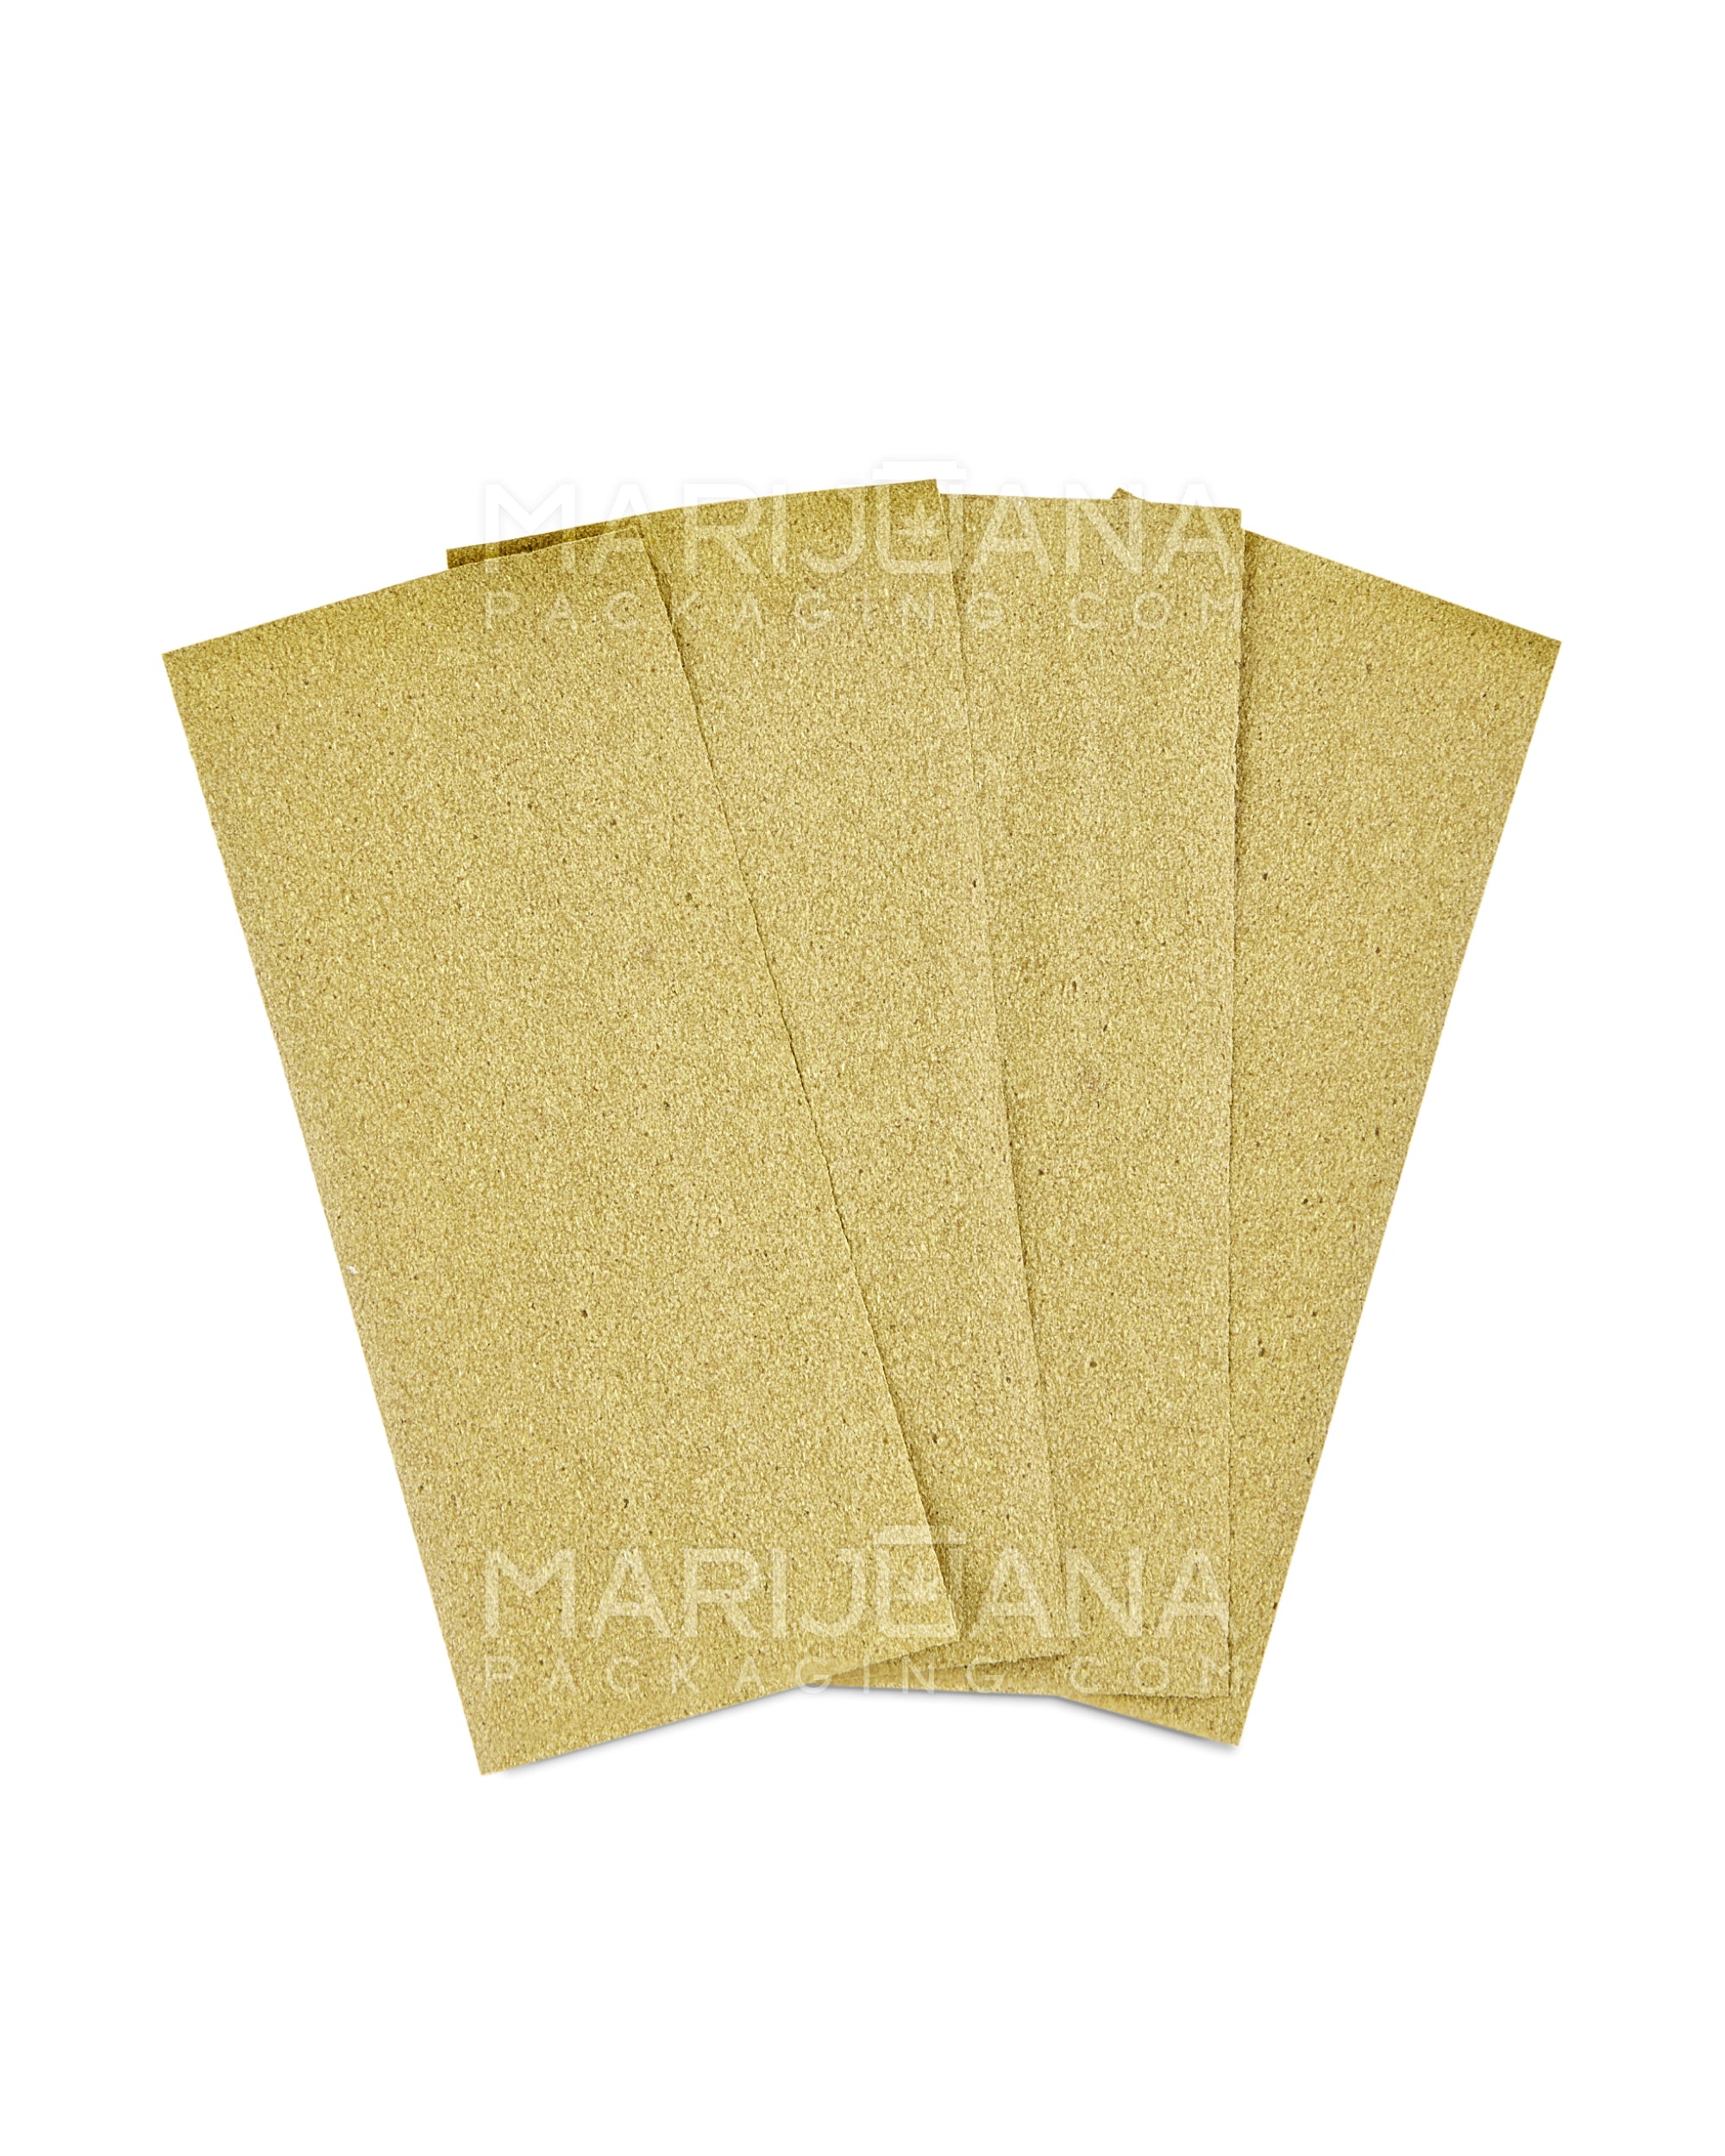 TWISTED HEMP | 'Retail Display' Blunt Wraps | 100mm - Tropical Breeze - 15 Count - 6